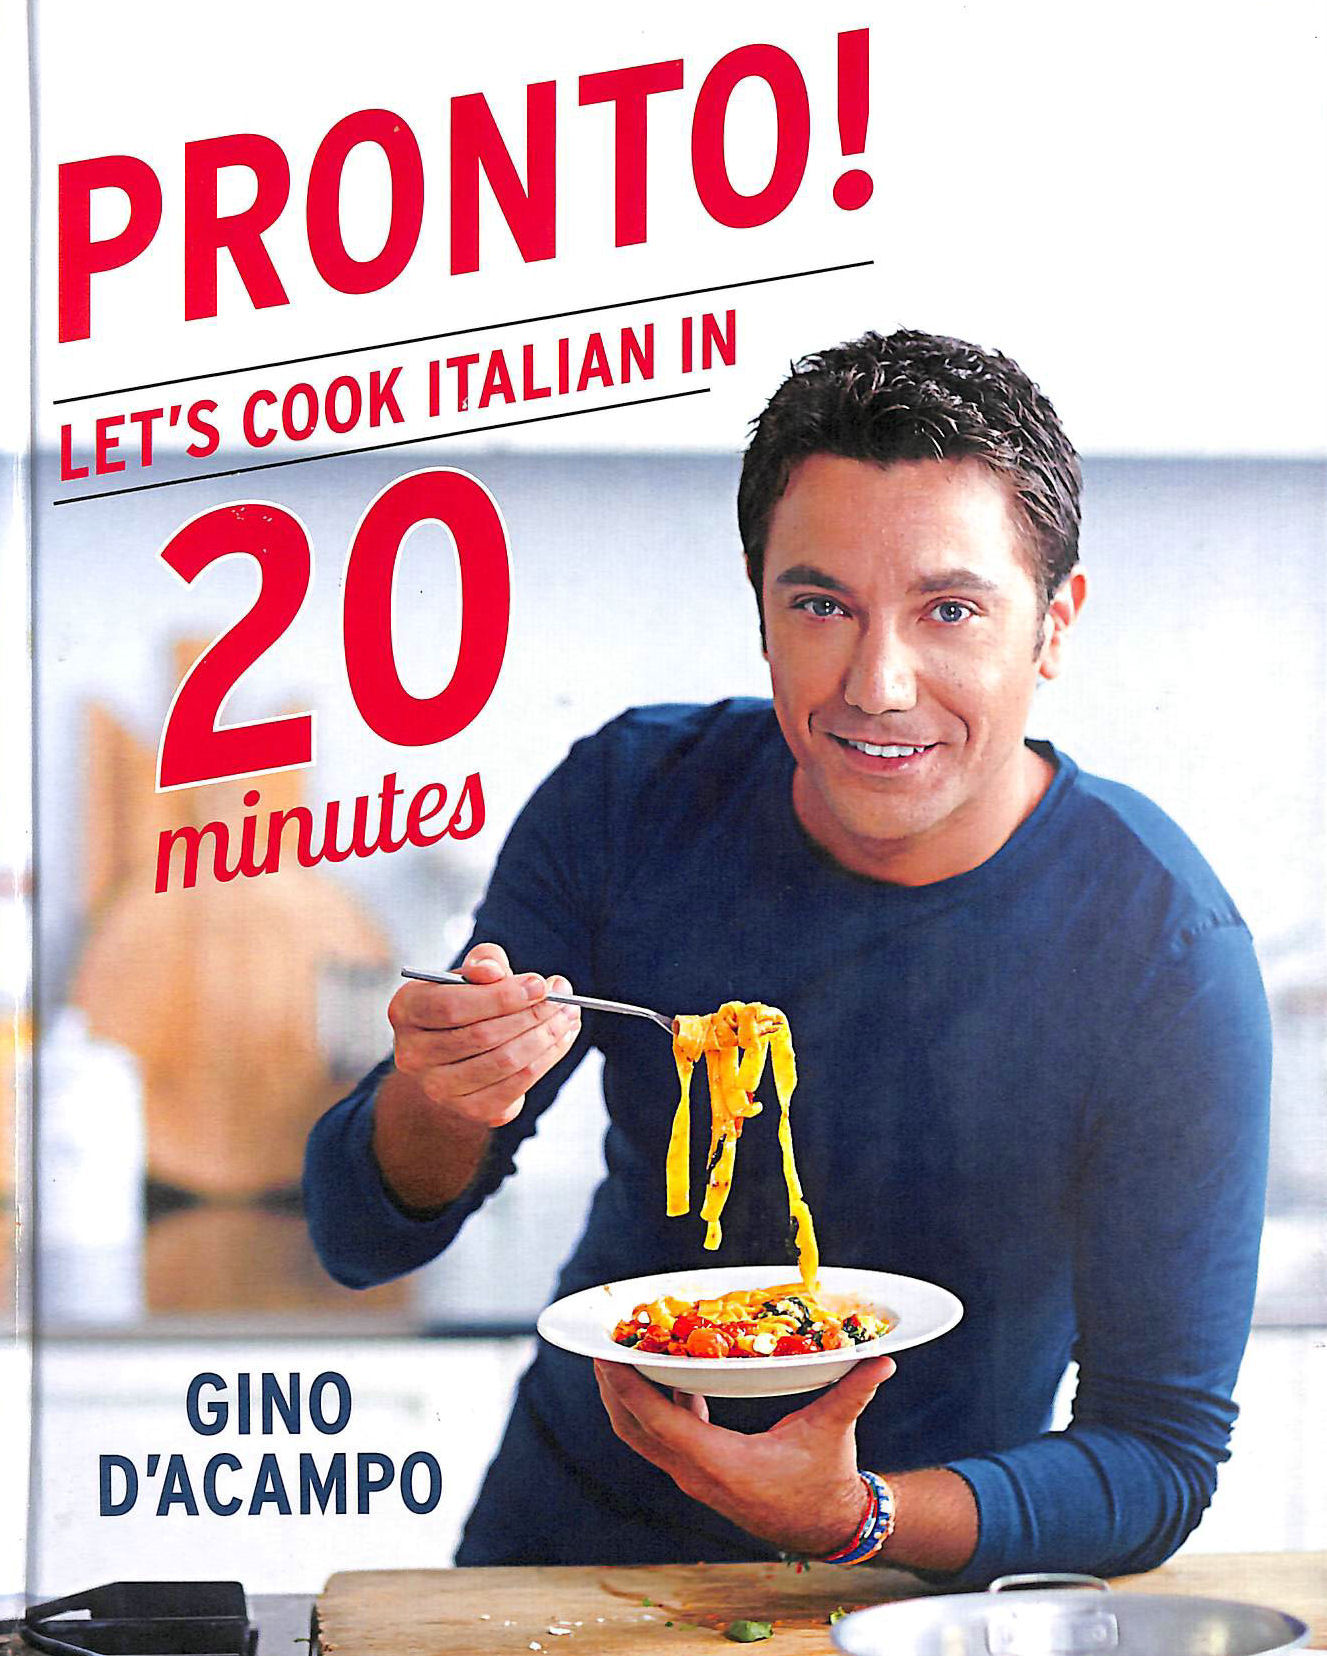 GINO D'ACAMPO - Pronto! Let's cook Italian in 20 minutes